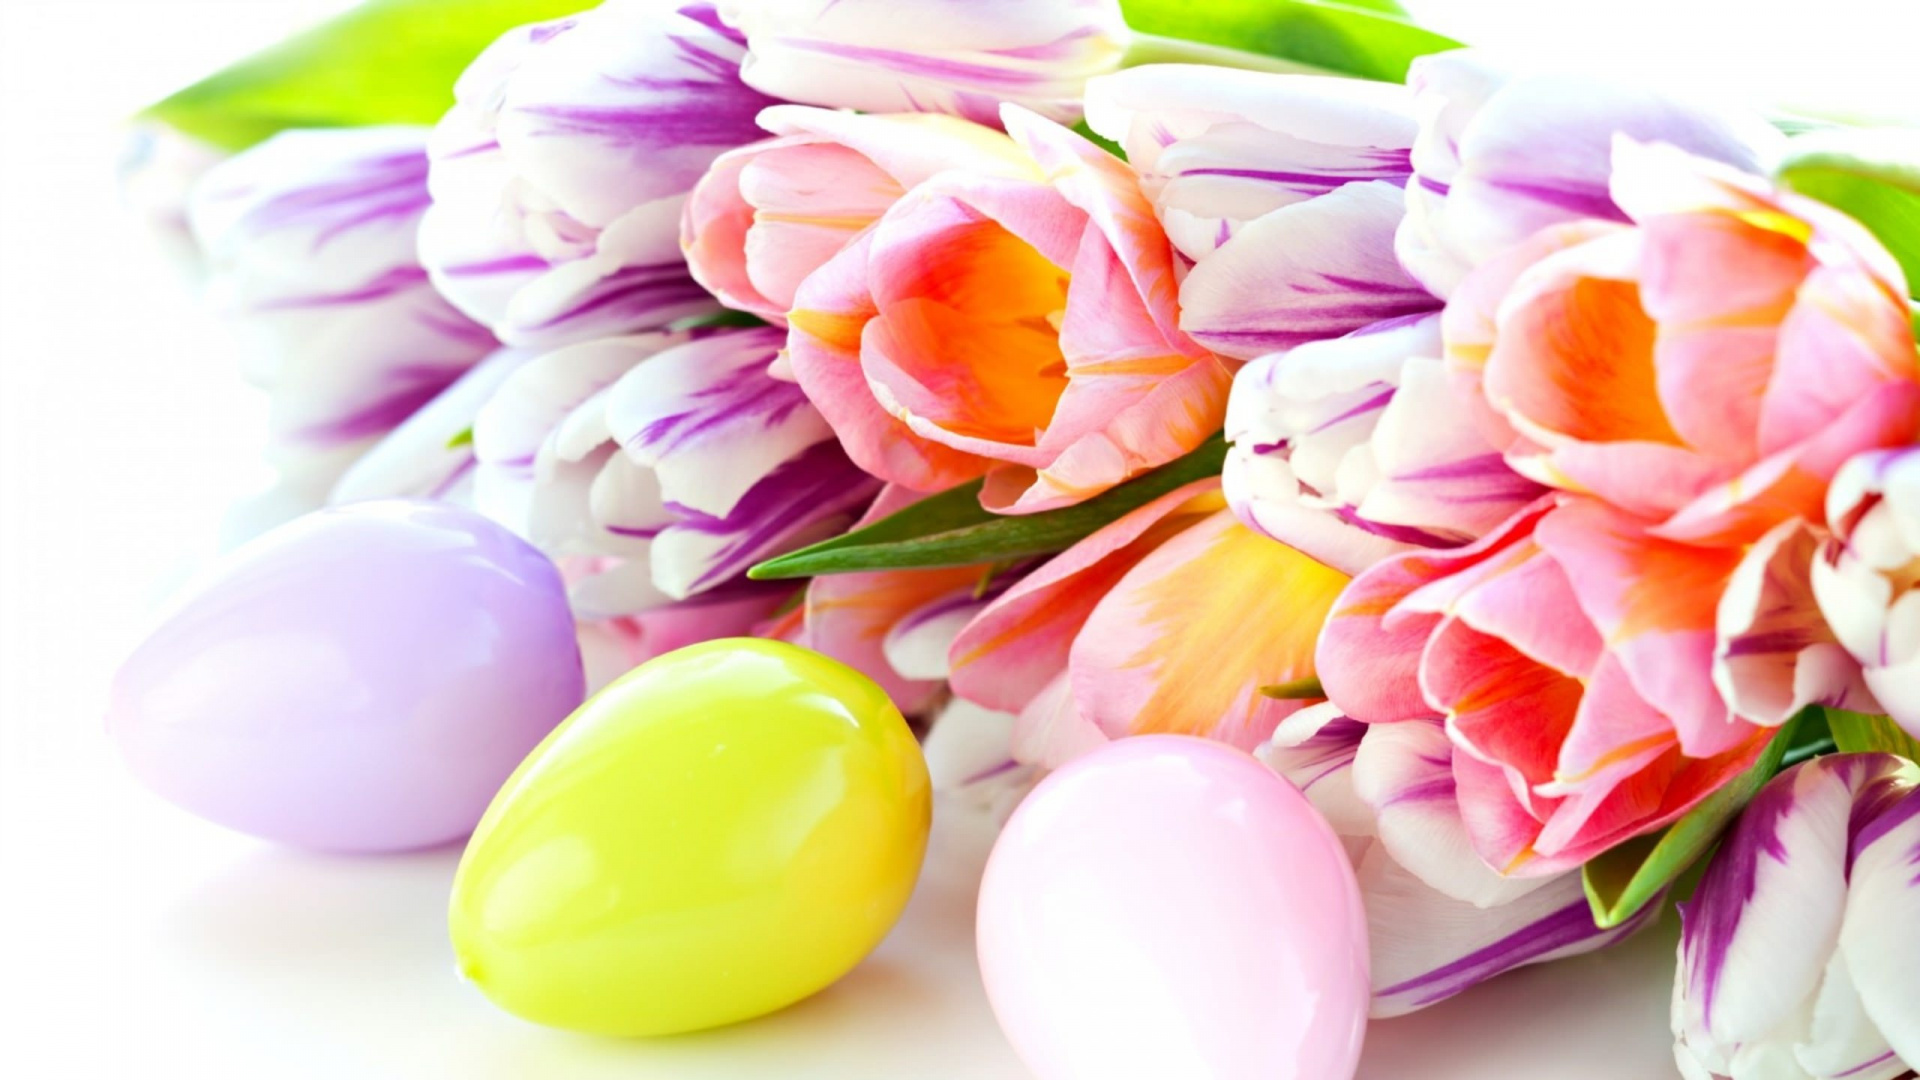 Pink and Yellow Tulips on White Surface. Wallpaper in 1920x1080 Resolution